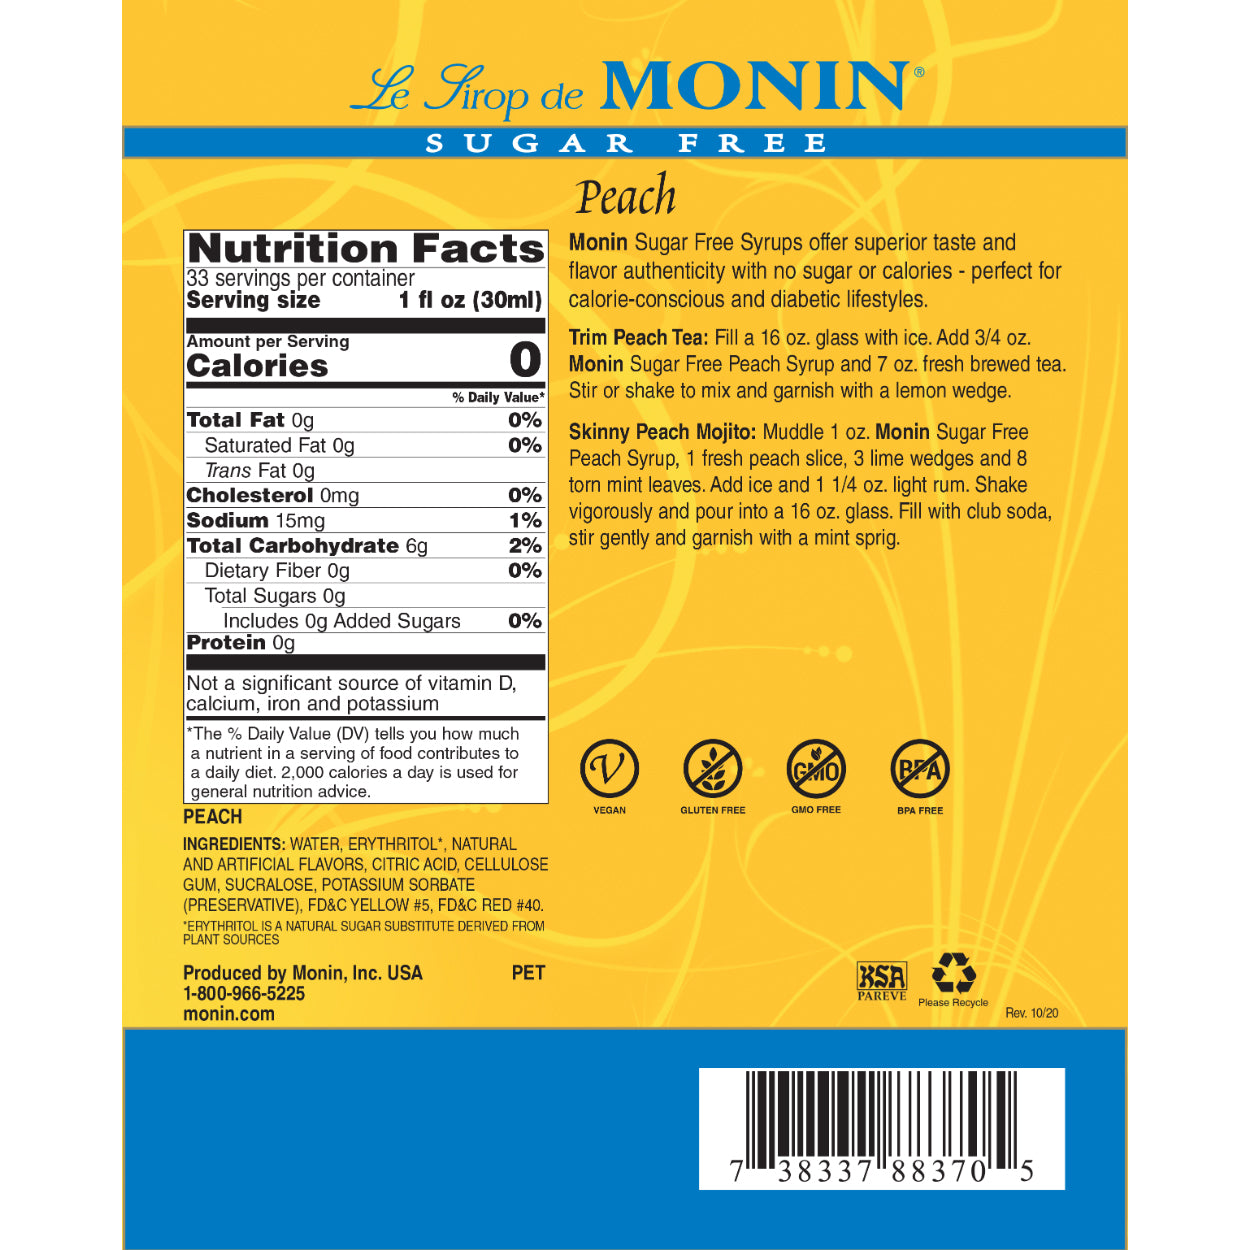 Monin Sugar Free Peach Syrup nutrition facts and recipe label